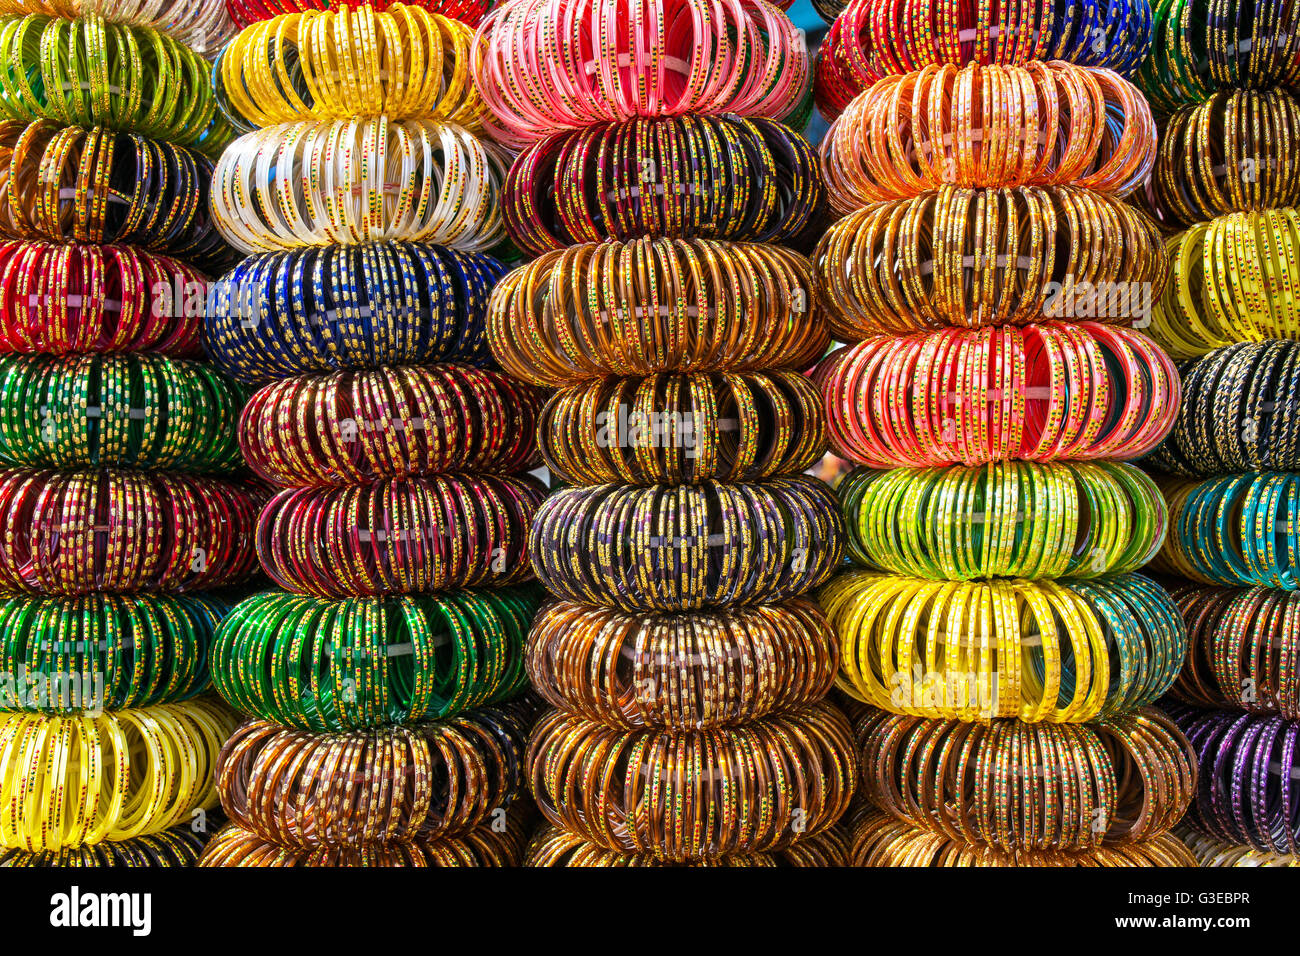 Colourful Indian wrist bracelets stacked in piles on display at a shop in Jaisalmer, India. Stock Photo